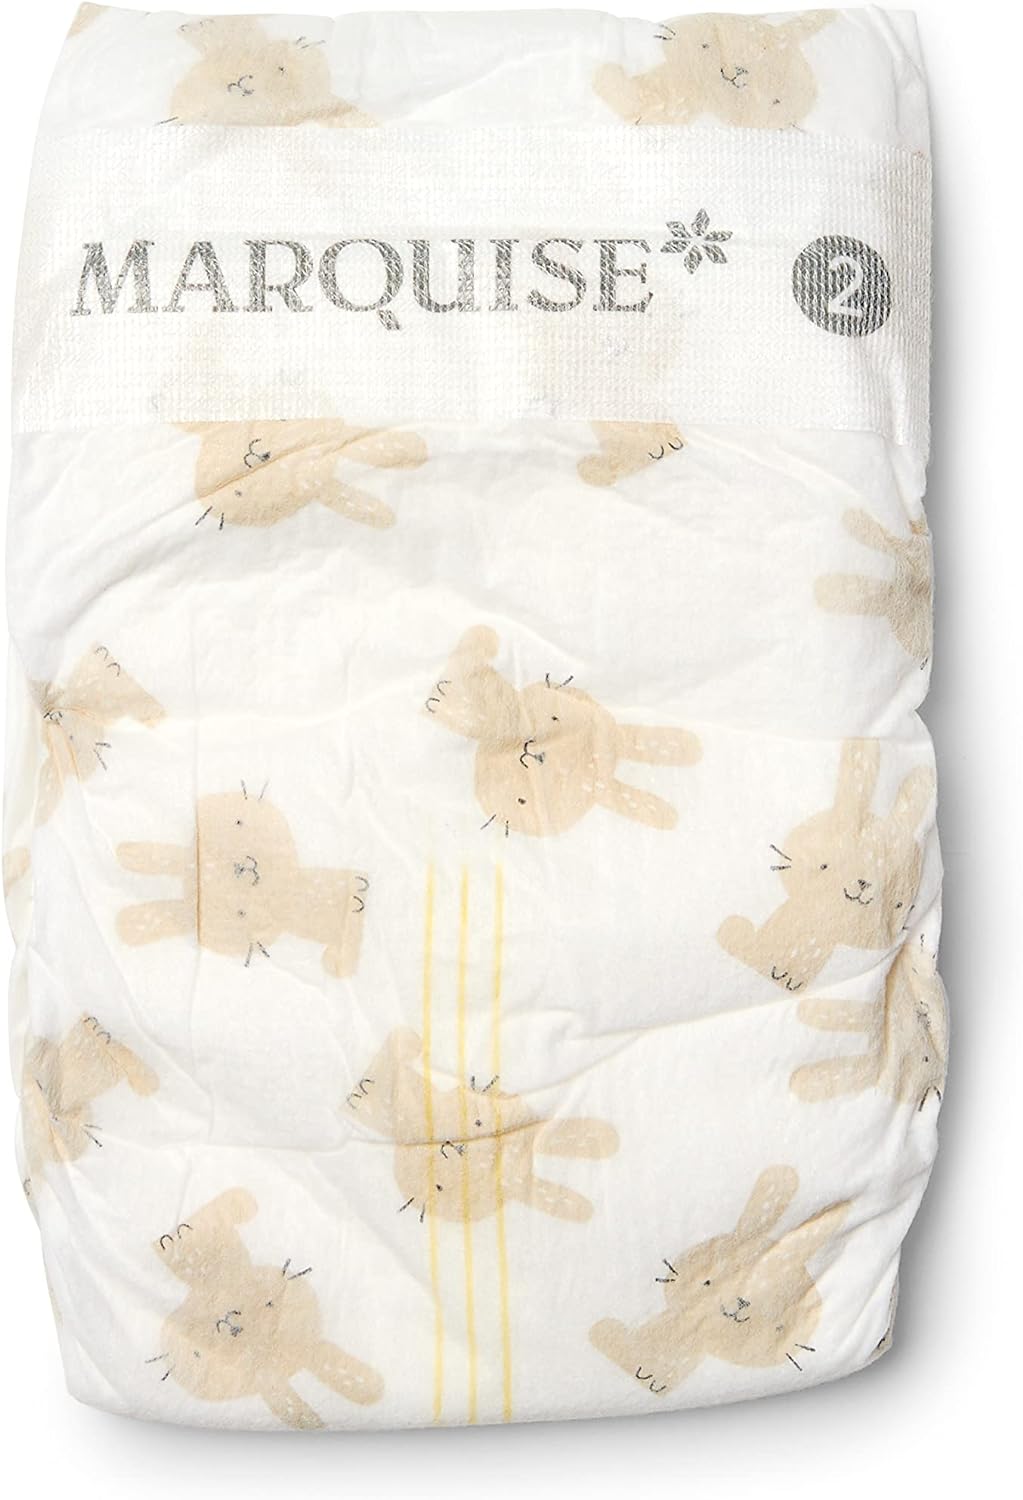 Marquise Baby Infant Nappies Size 2 (4-8kg) - 72 Count (3 x 24 Packs), Premium Eco-Friendly Nappy Pants, Quick Dry 12-Hours Leak Protection - Lightweight, Super Stretch Pure Comfort